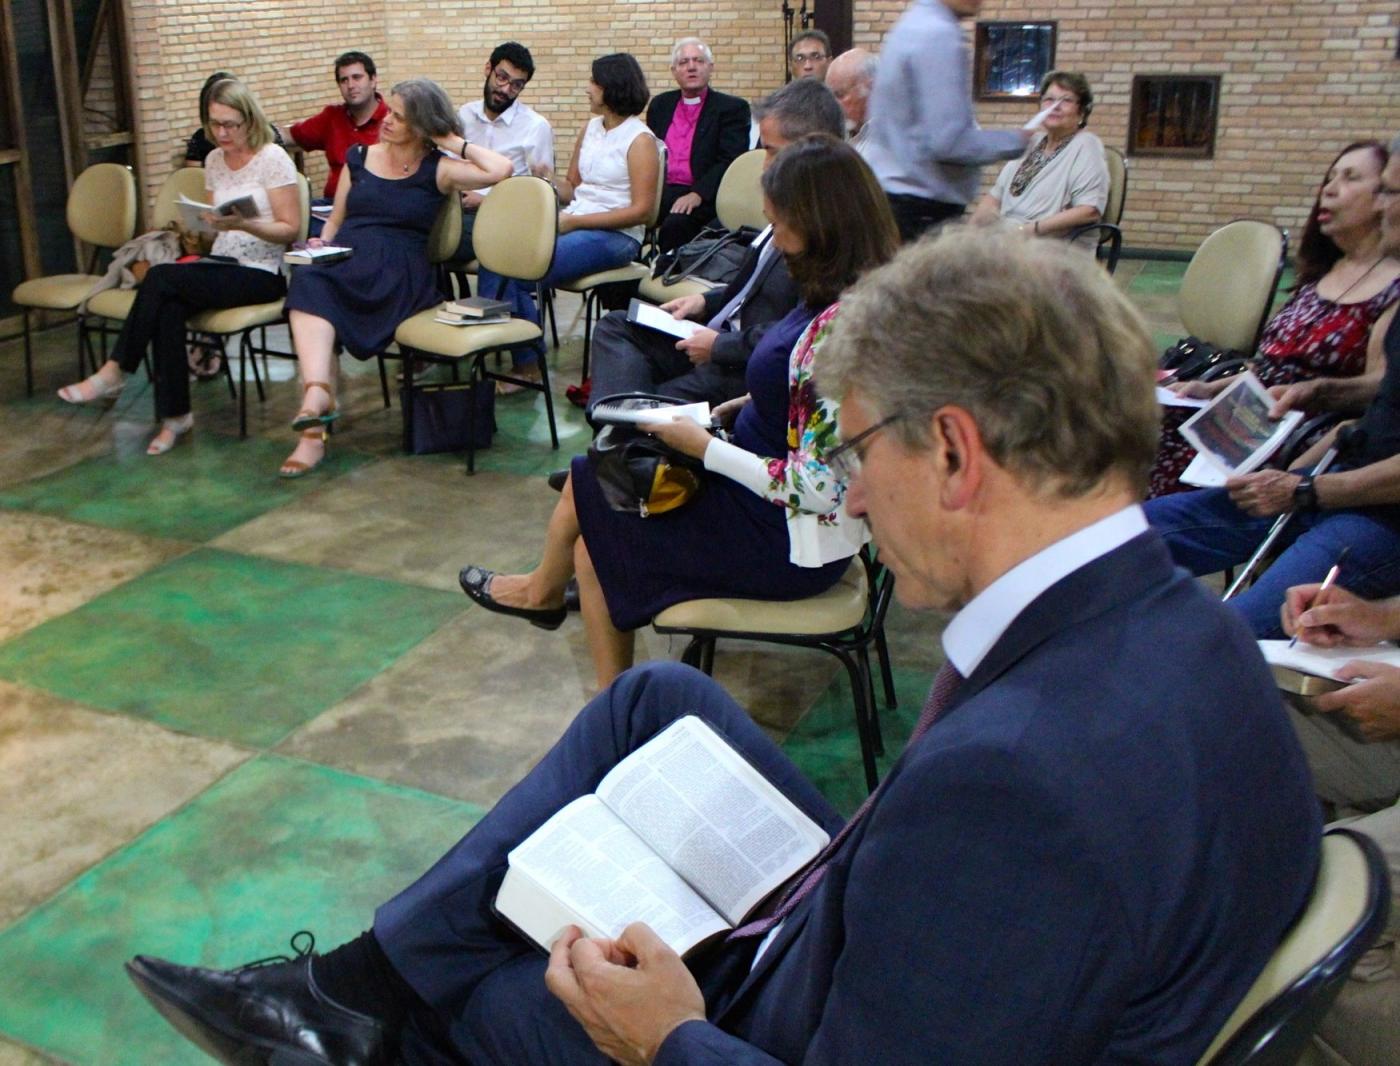 Olav Fykse Tveit participating in a Bible study at the United Presbyterian Church of Brazil. © WCC/Marcelo Schneider